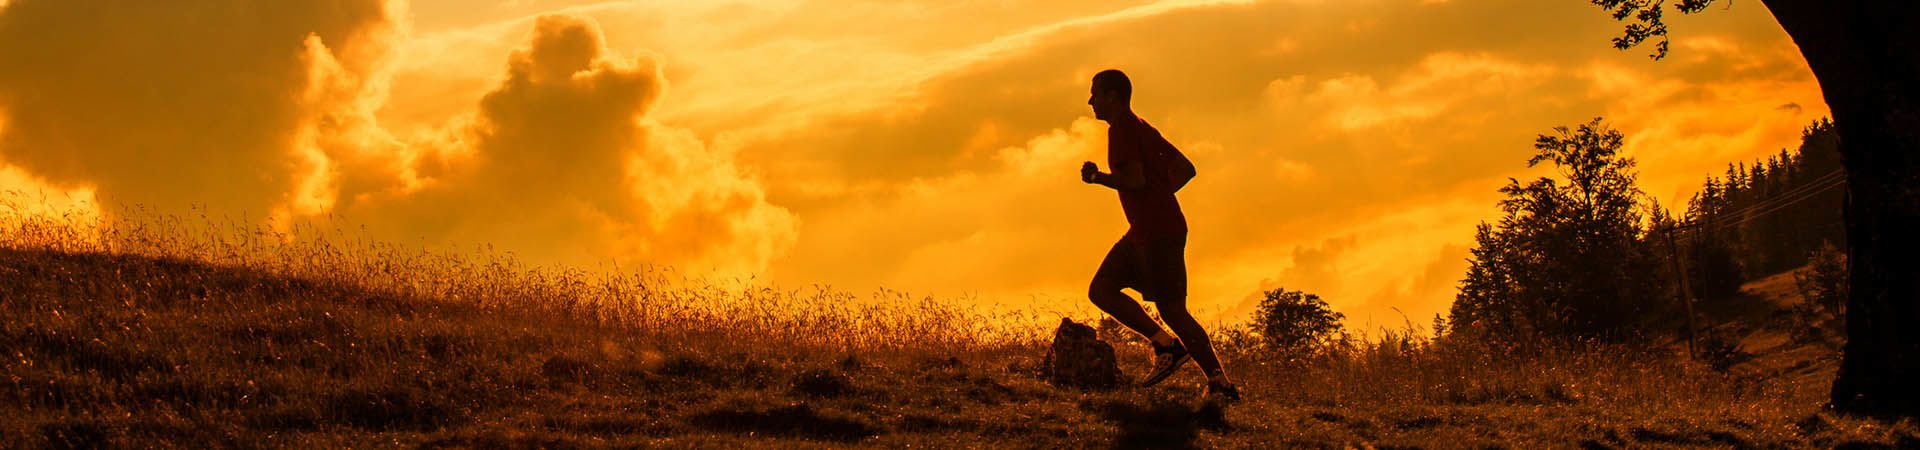 Running for beginners - running and jogging increase fitness.